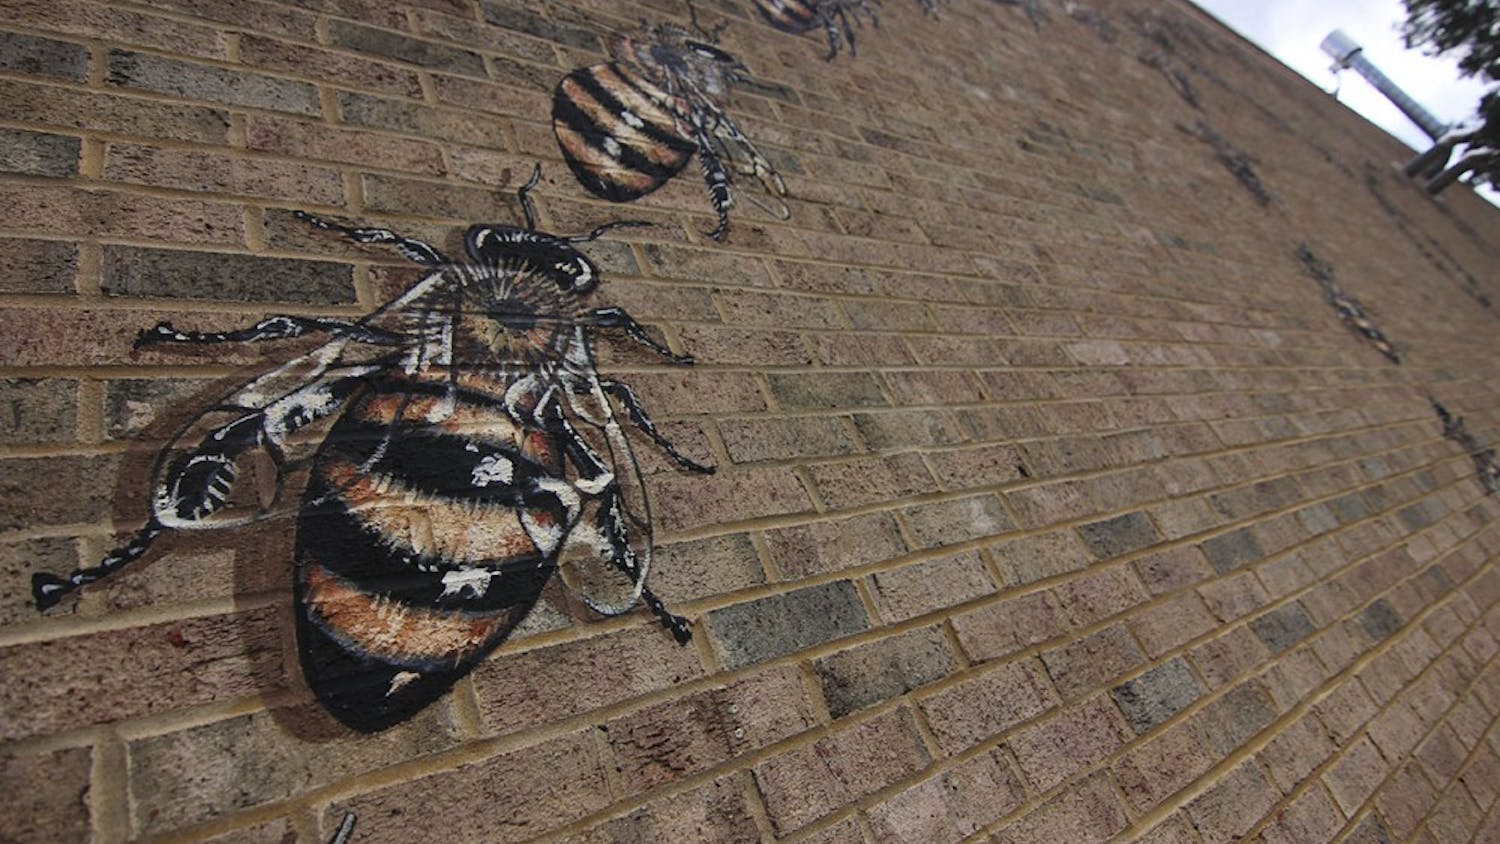 This mural of bumblebees, located on an outer wall of the Carrboro Fire Department, was painted by Matthew Wiley in an effort to paint 50,000 bees on murals throughout the world. 